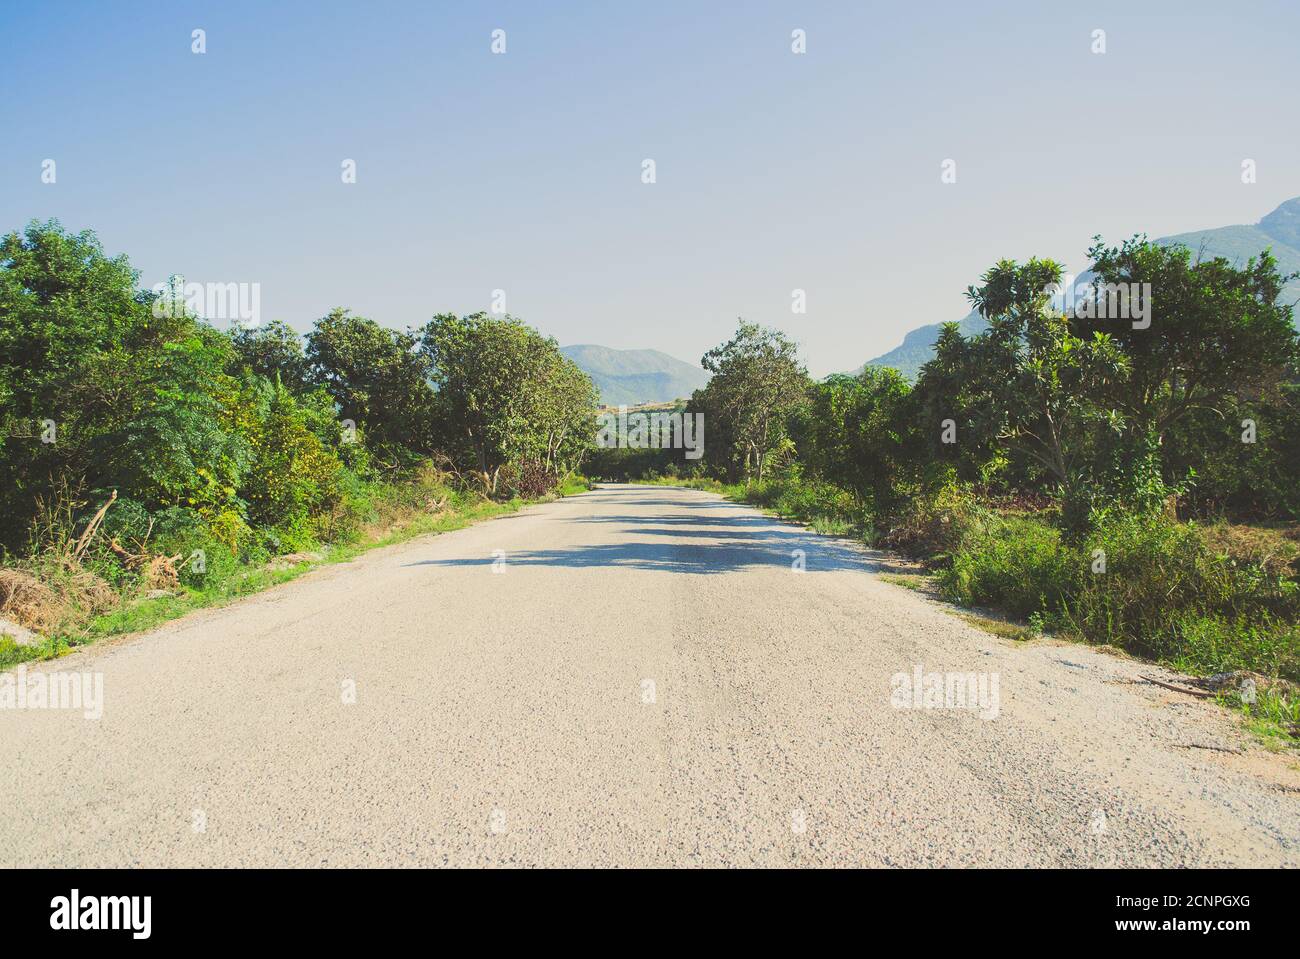 Front view of asphalt road with fruit trees on both road-sides, Turkey Stock Photo